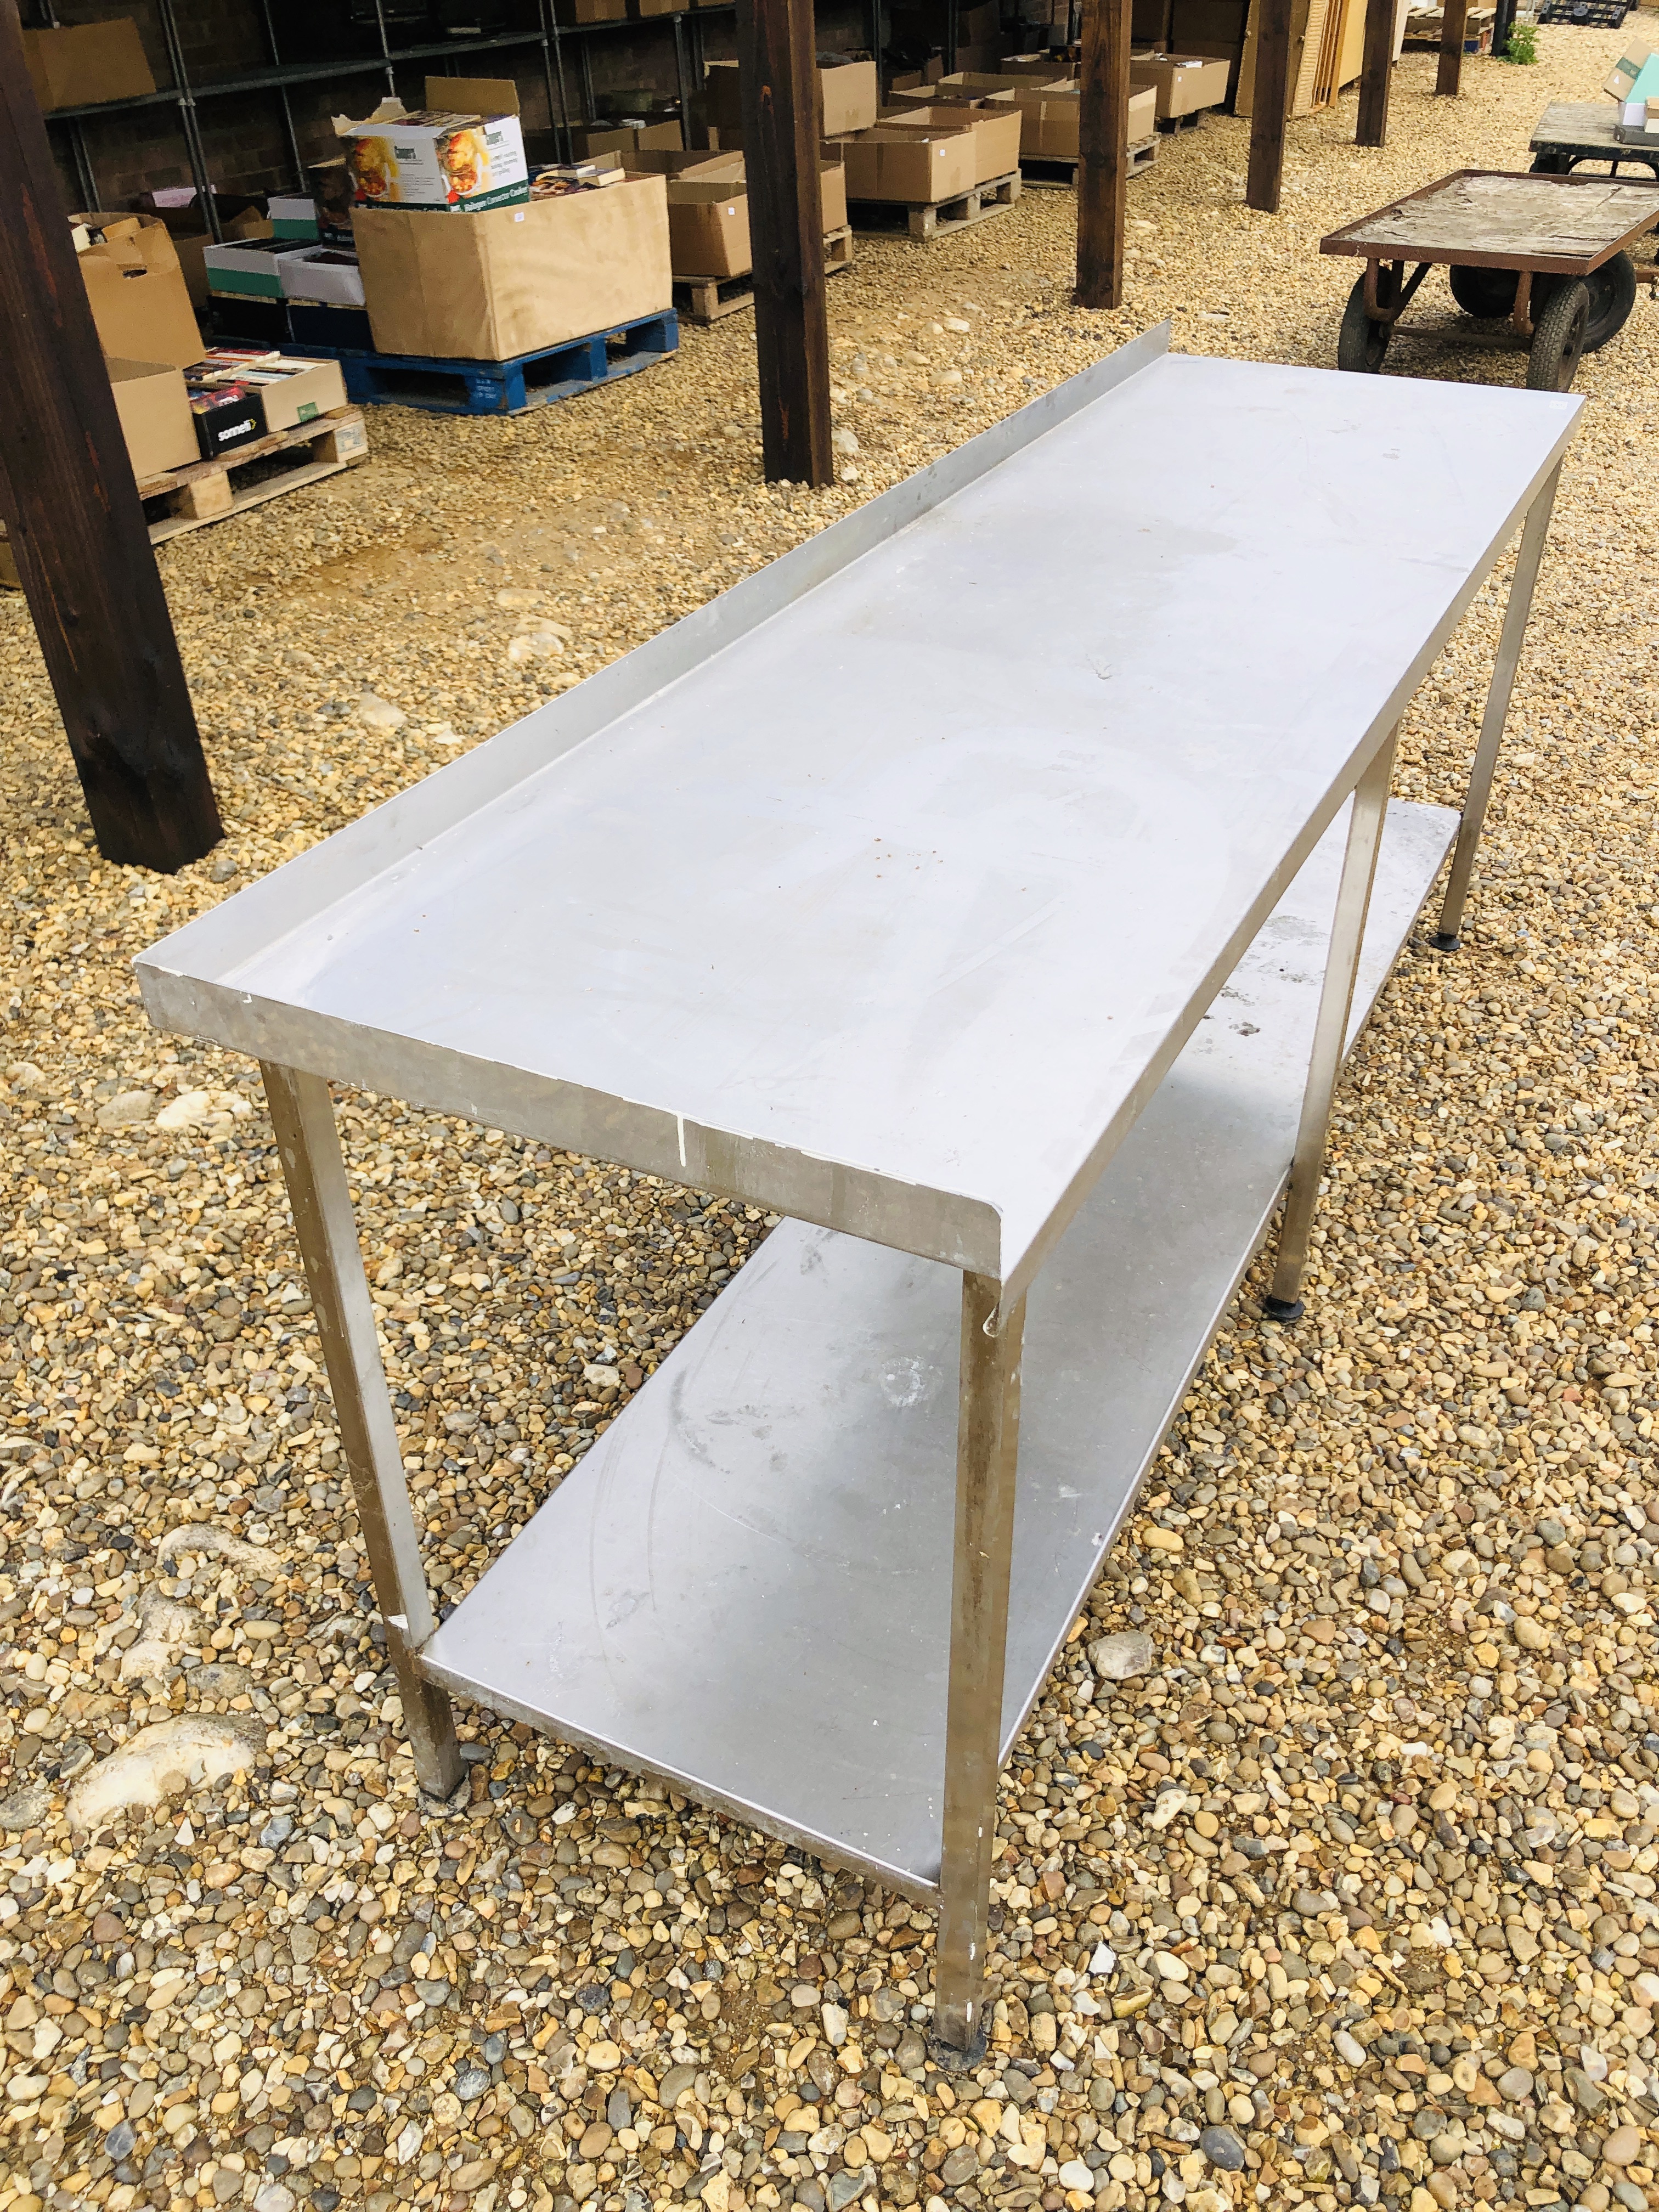 STAINLESS STEEL TWO TIER COMMERCIAL PREPARATION TABLE LENGTH 82 INCH - Image 3 of 3